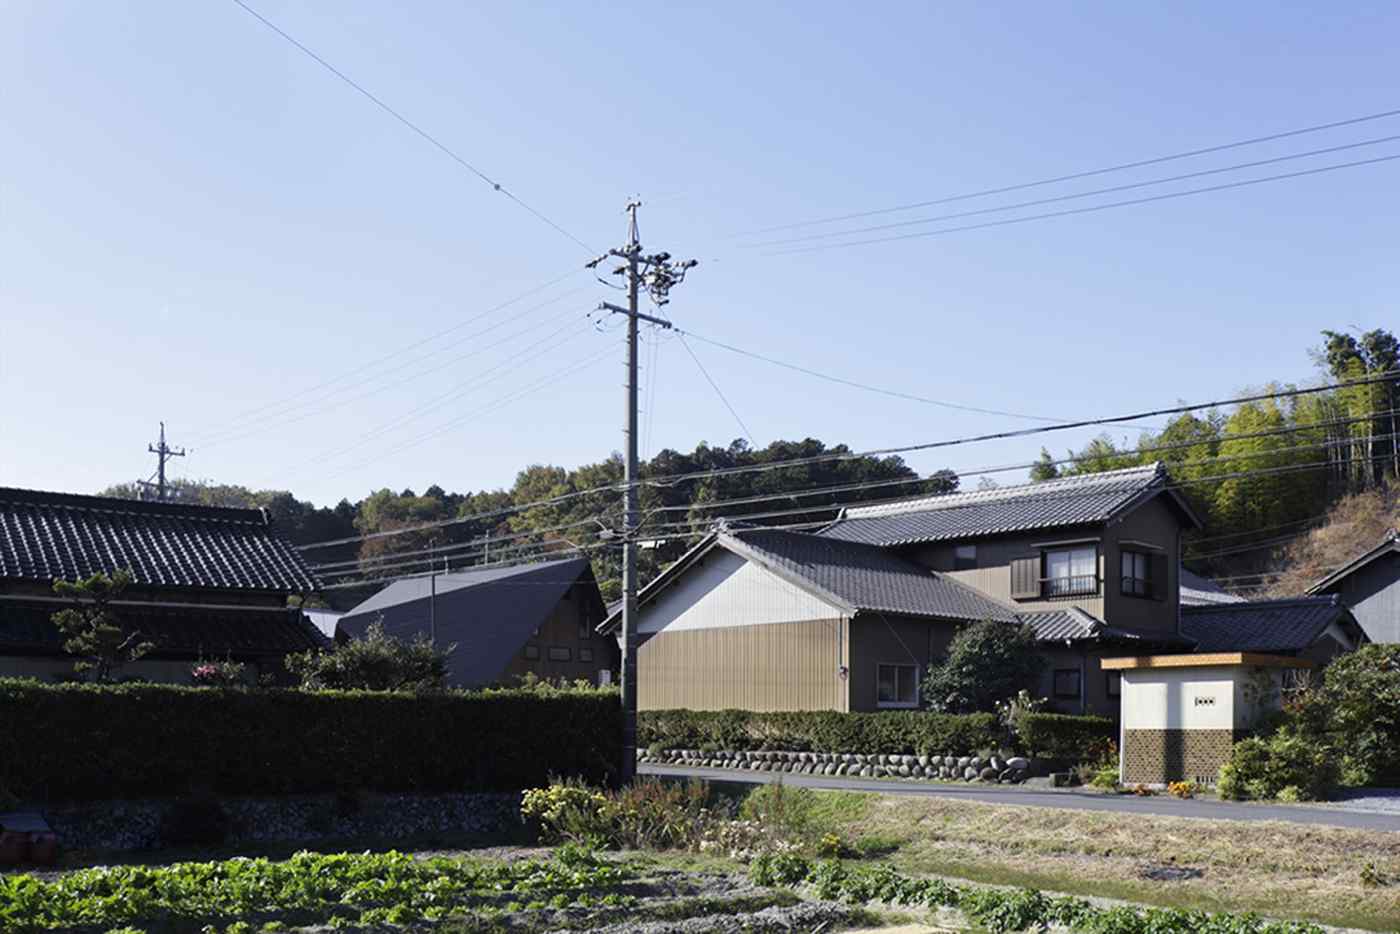 Family houses in Japan modern and functional architecture with wood cladding in the facade and a saddle roof